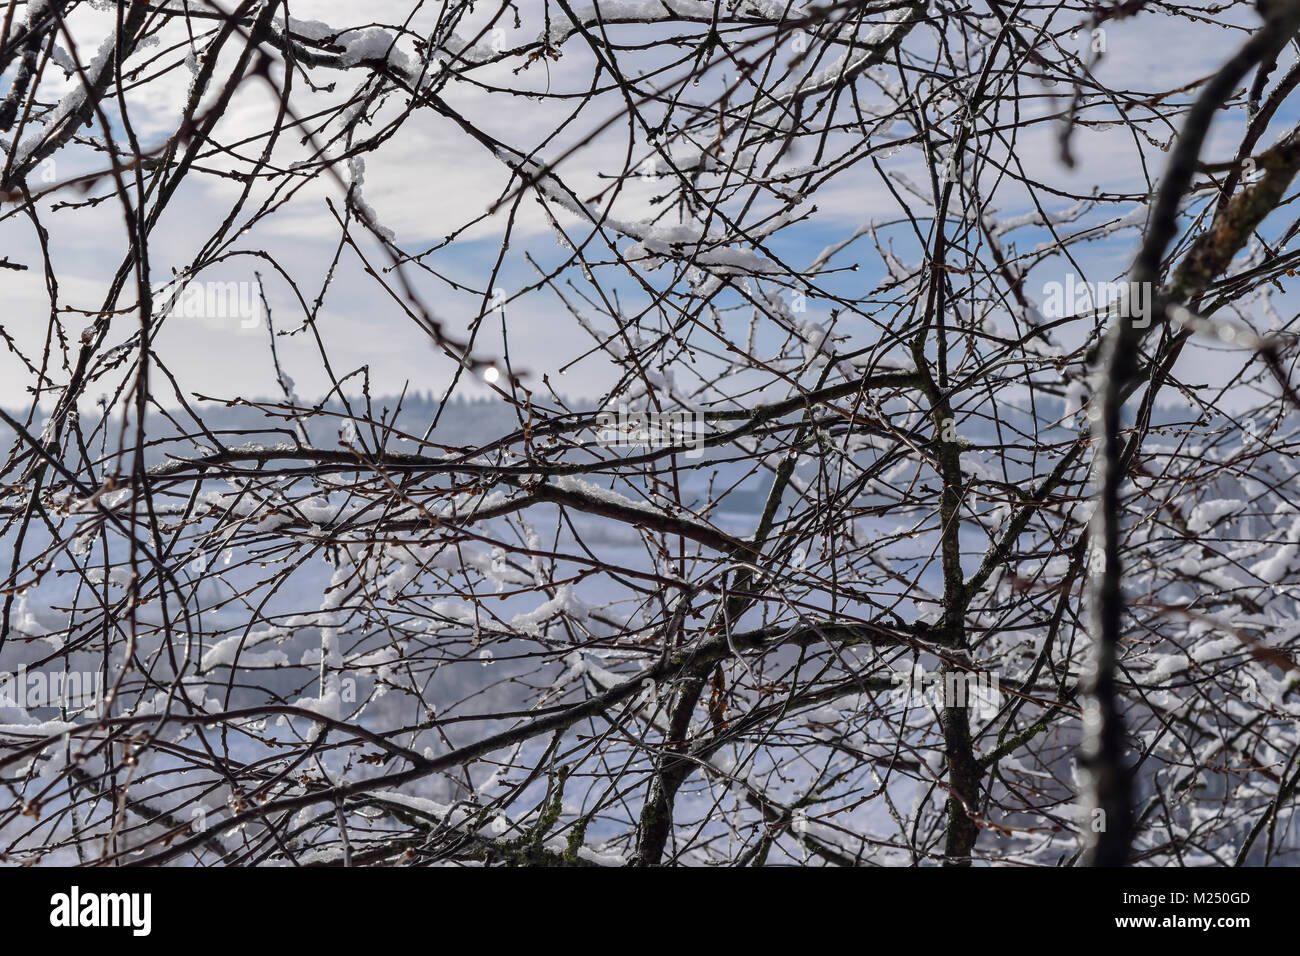 Melting snow on the branches in early springtime. Melted snow formatting the drops of water on the branches Stock Photo